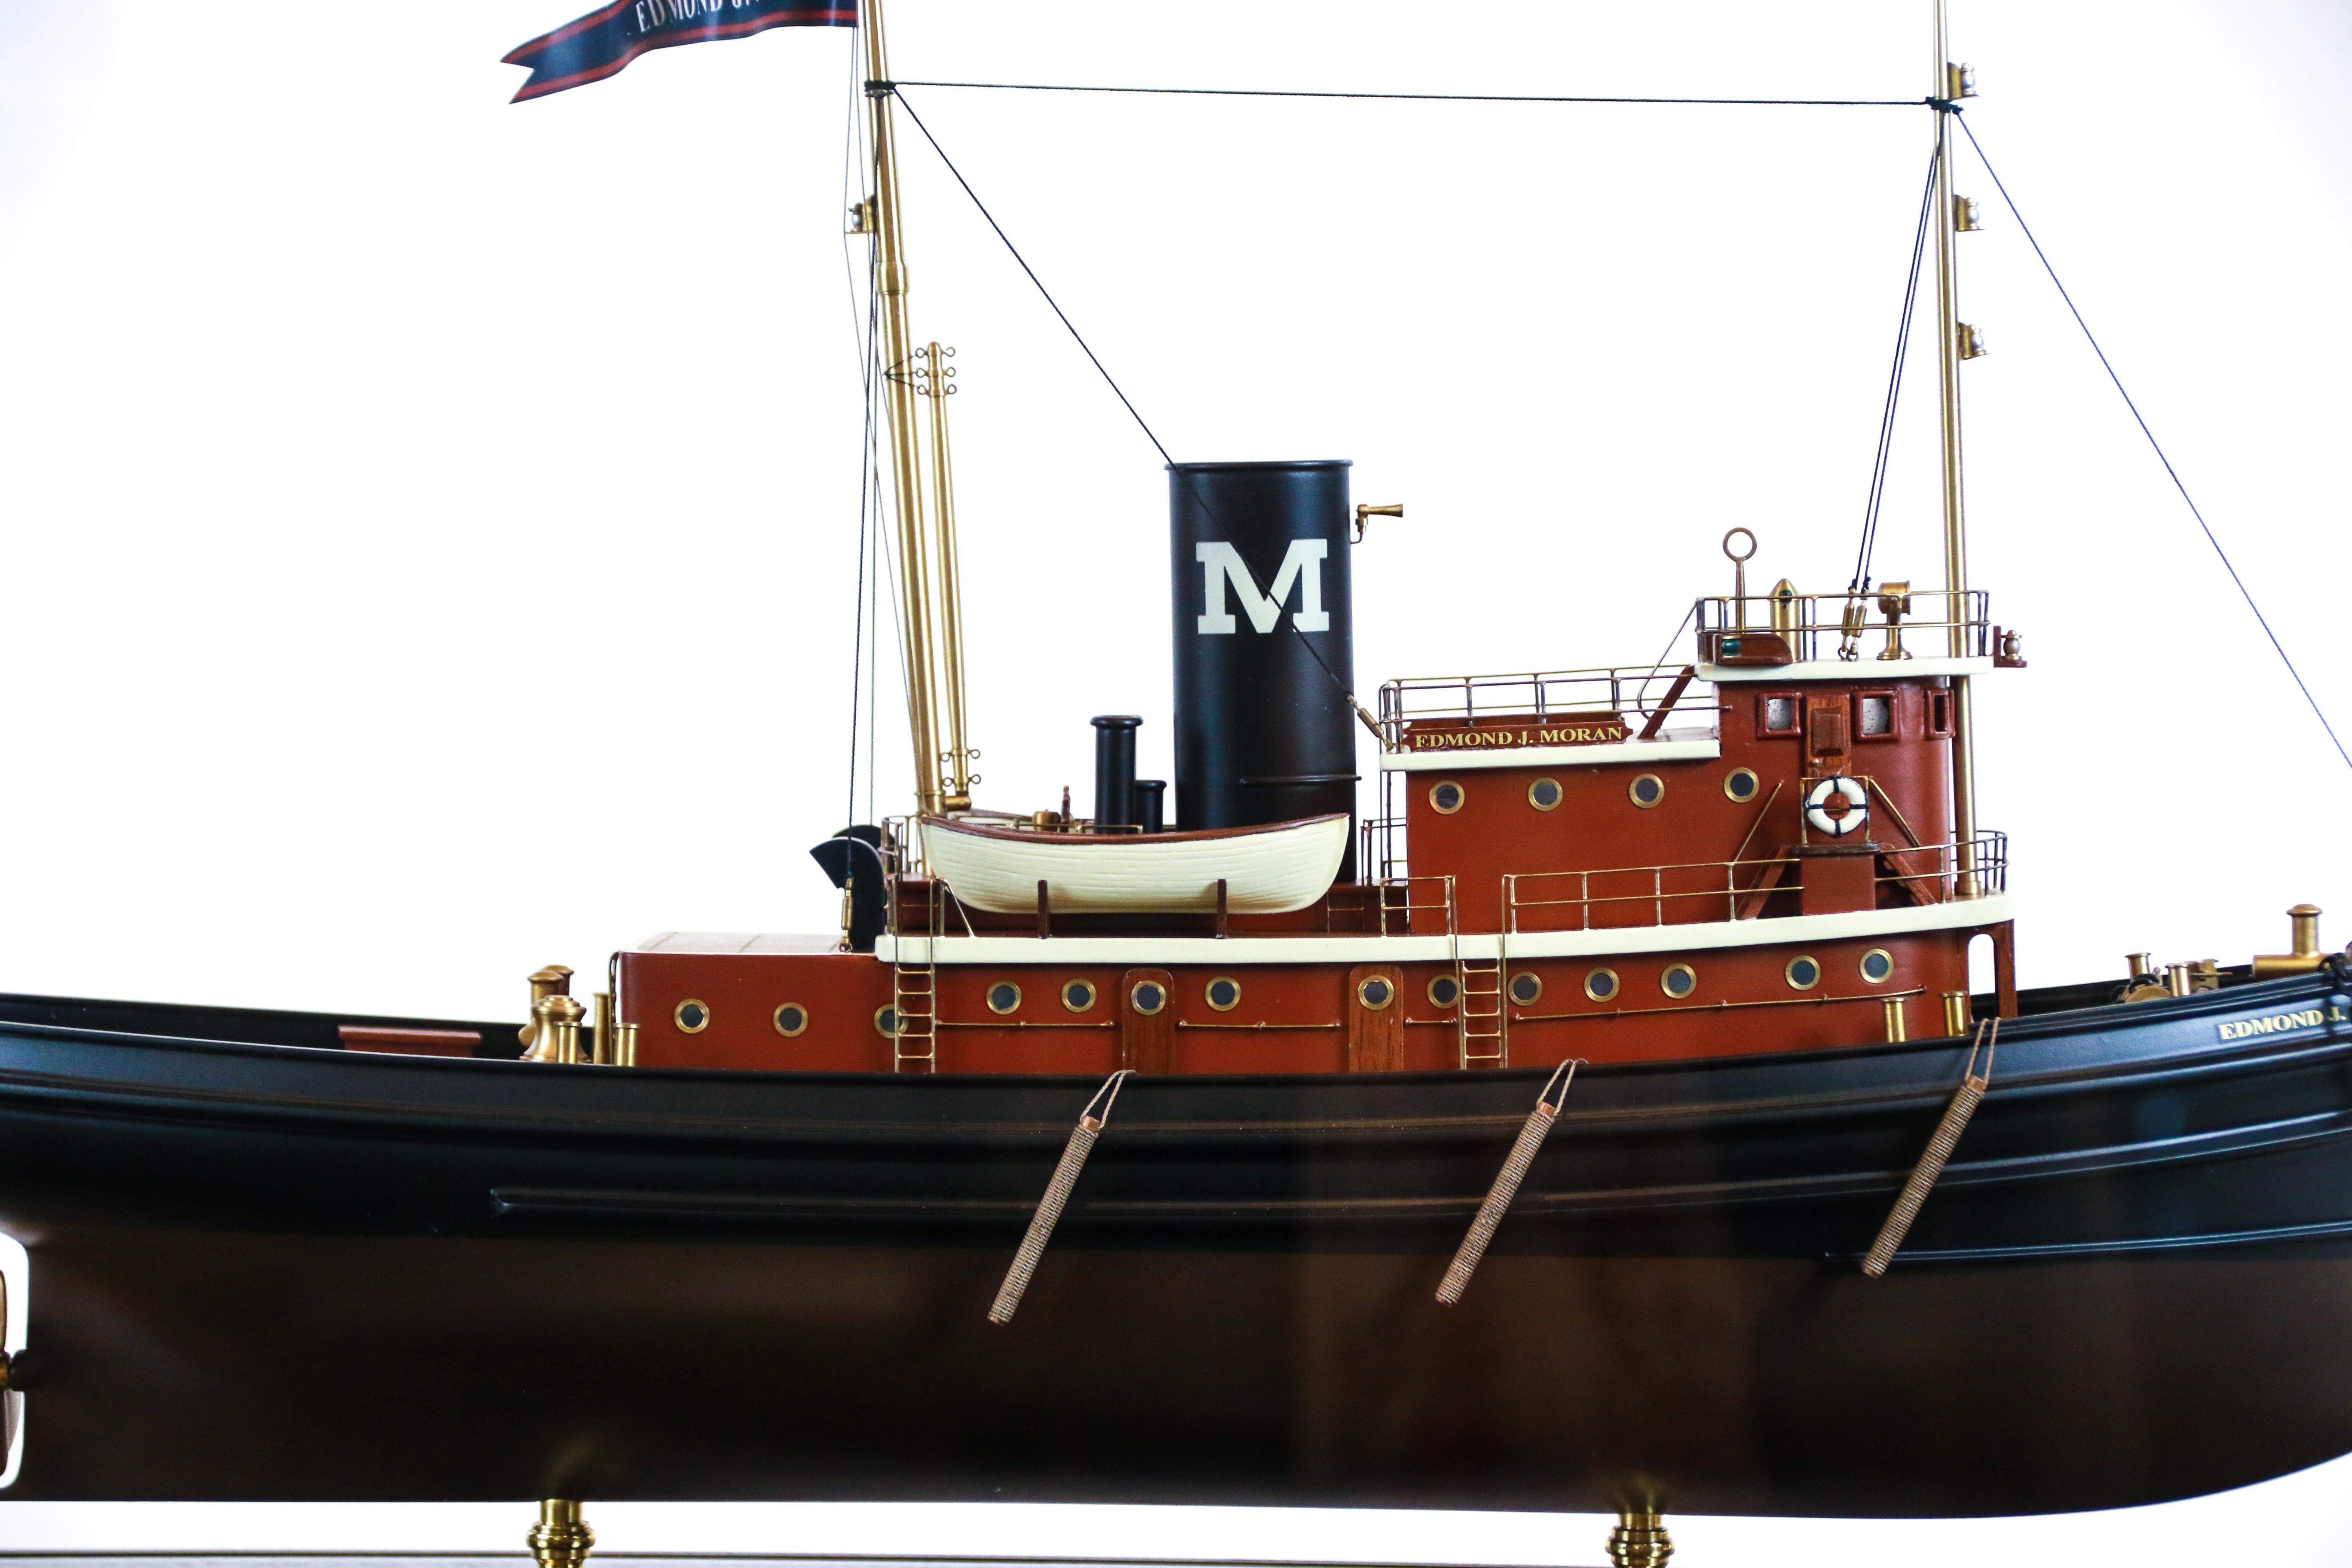 Moran Tug in display case of glass and brass trim. Model details include stack, helm, wheelhouse, binnacle, capstan, spotlight, lifering, portholes, ladders etc... 
Moran Towing traces its origins to 1855, when Michael Moran, a 22-year-old